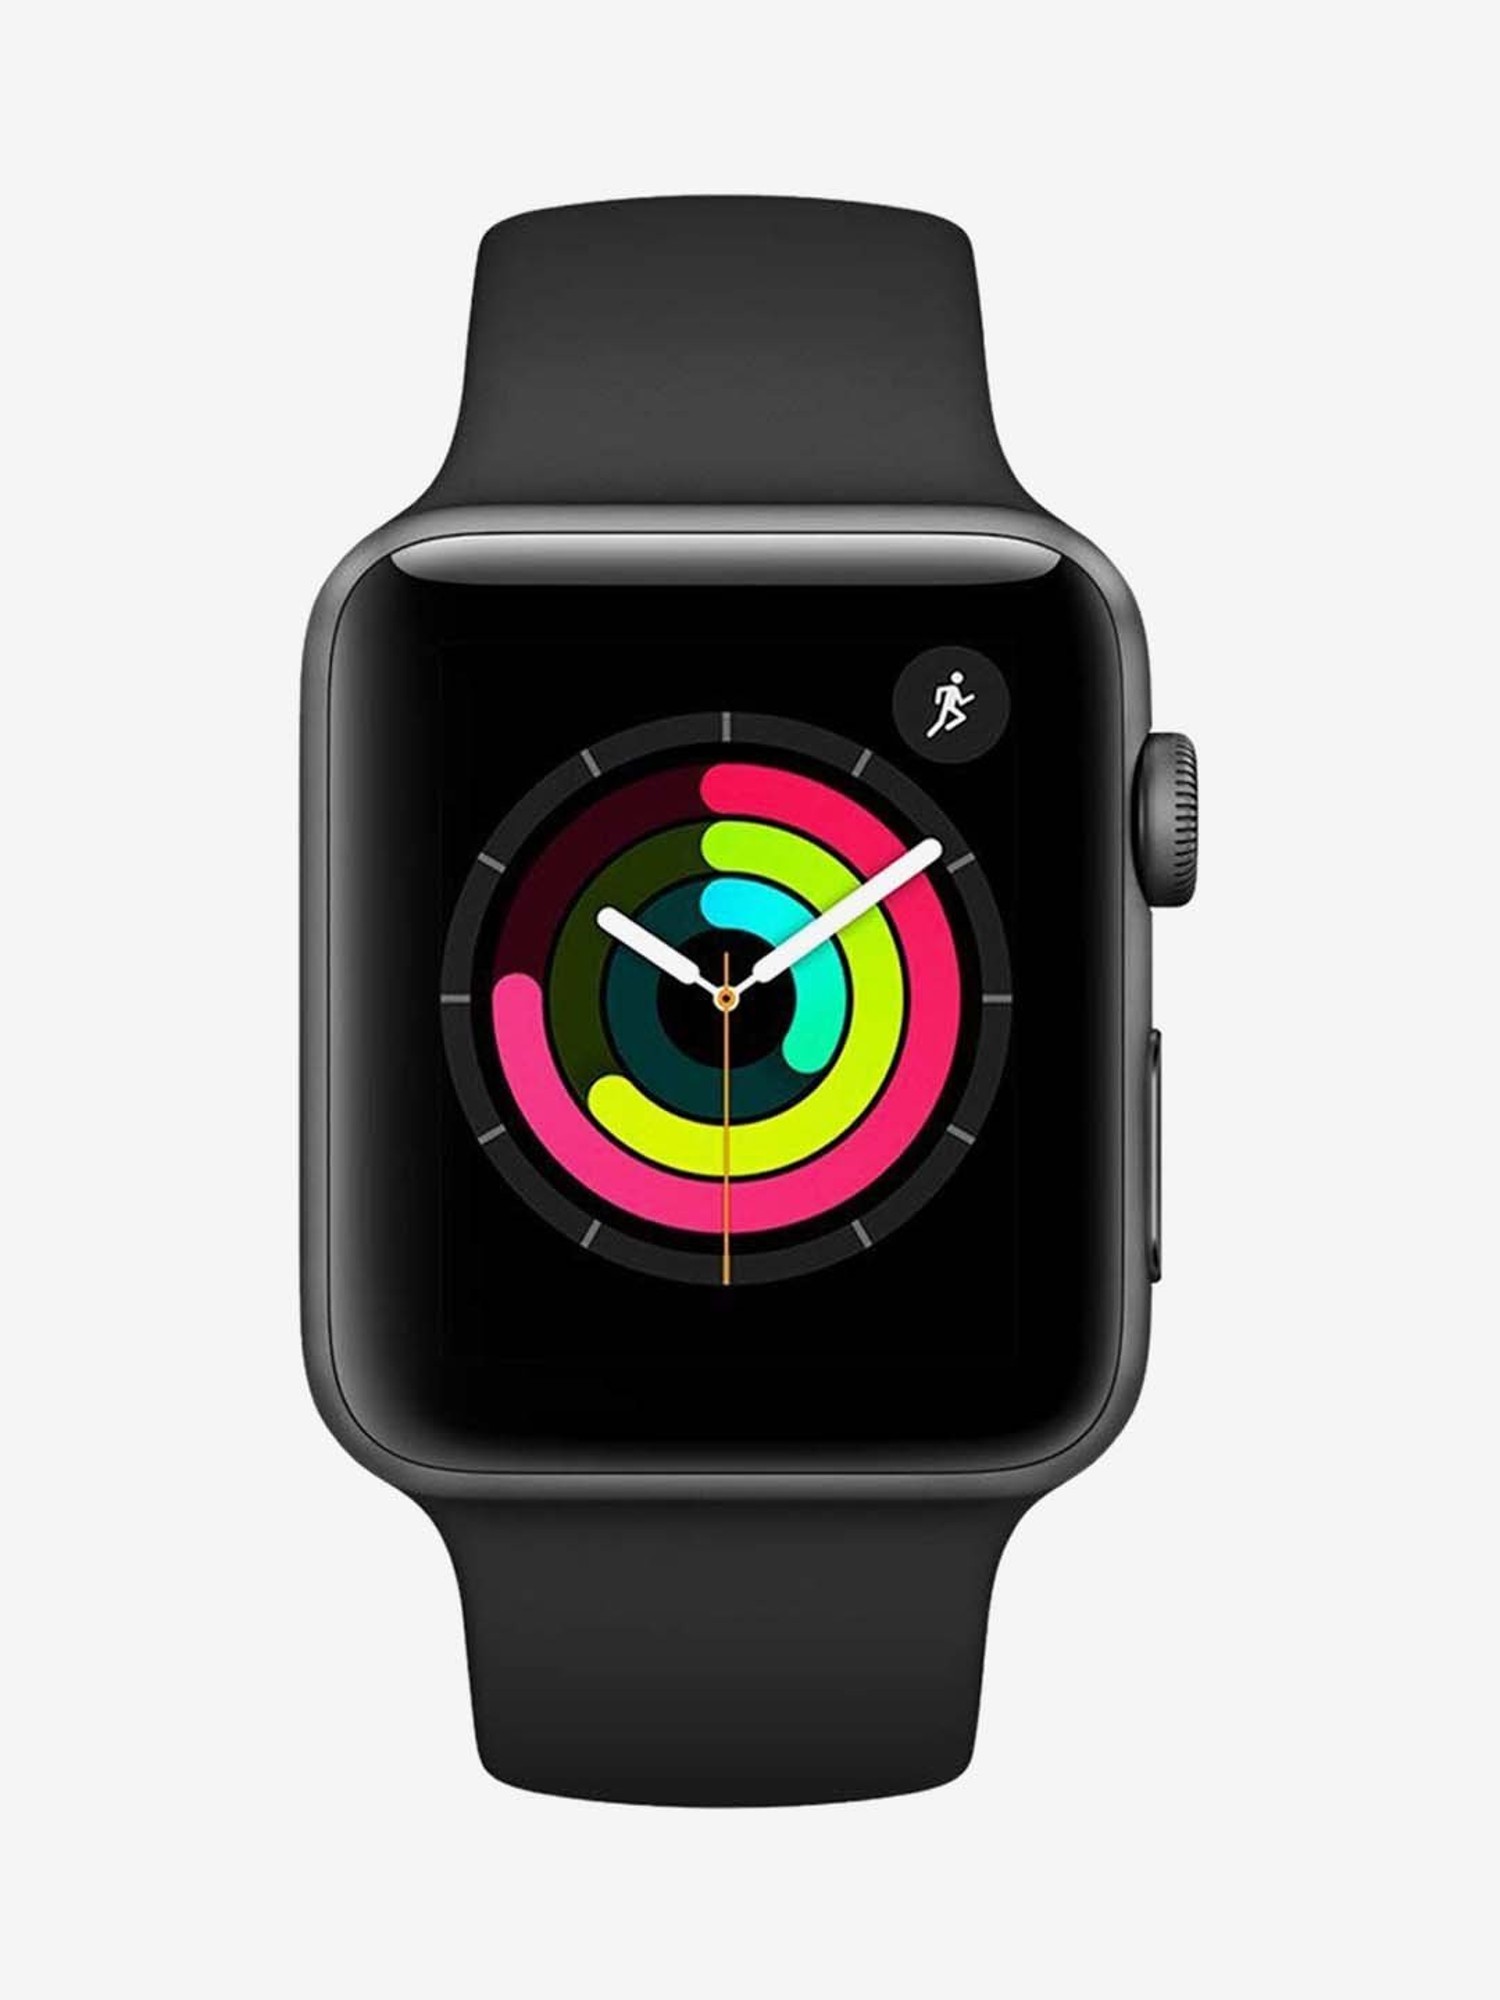 Apple Watch Series 3 Sport Band Online, 58% OFF | lagence.tv